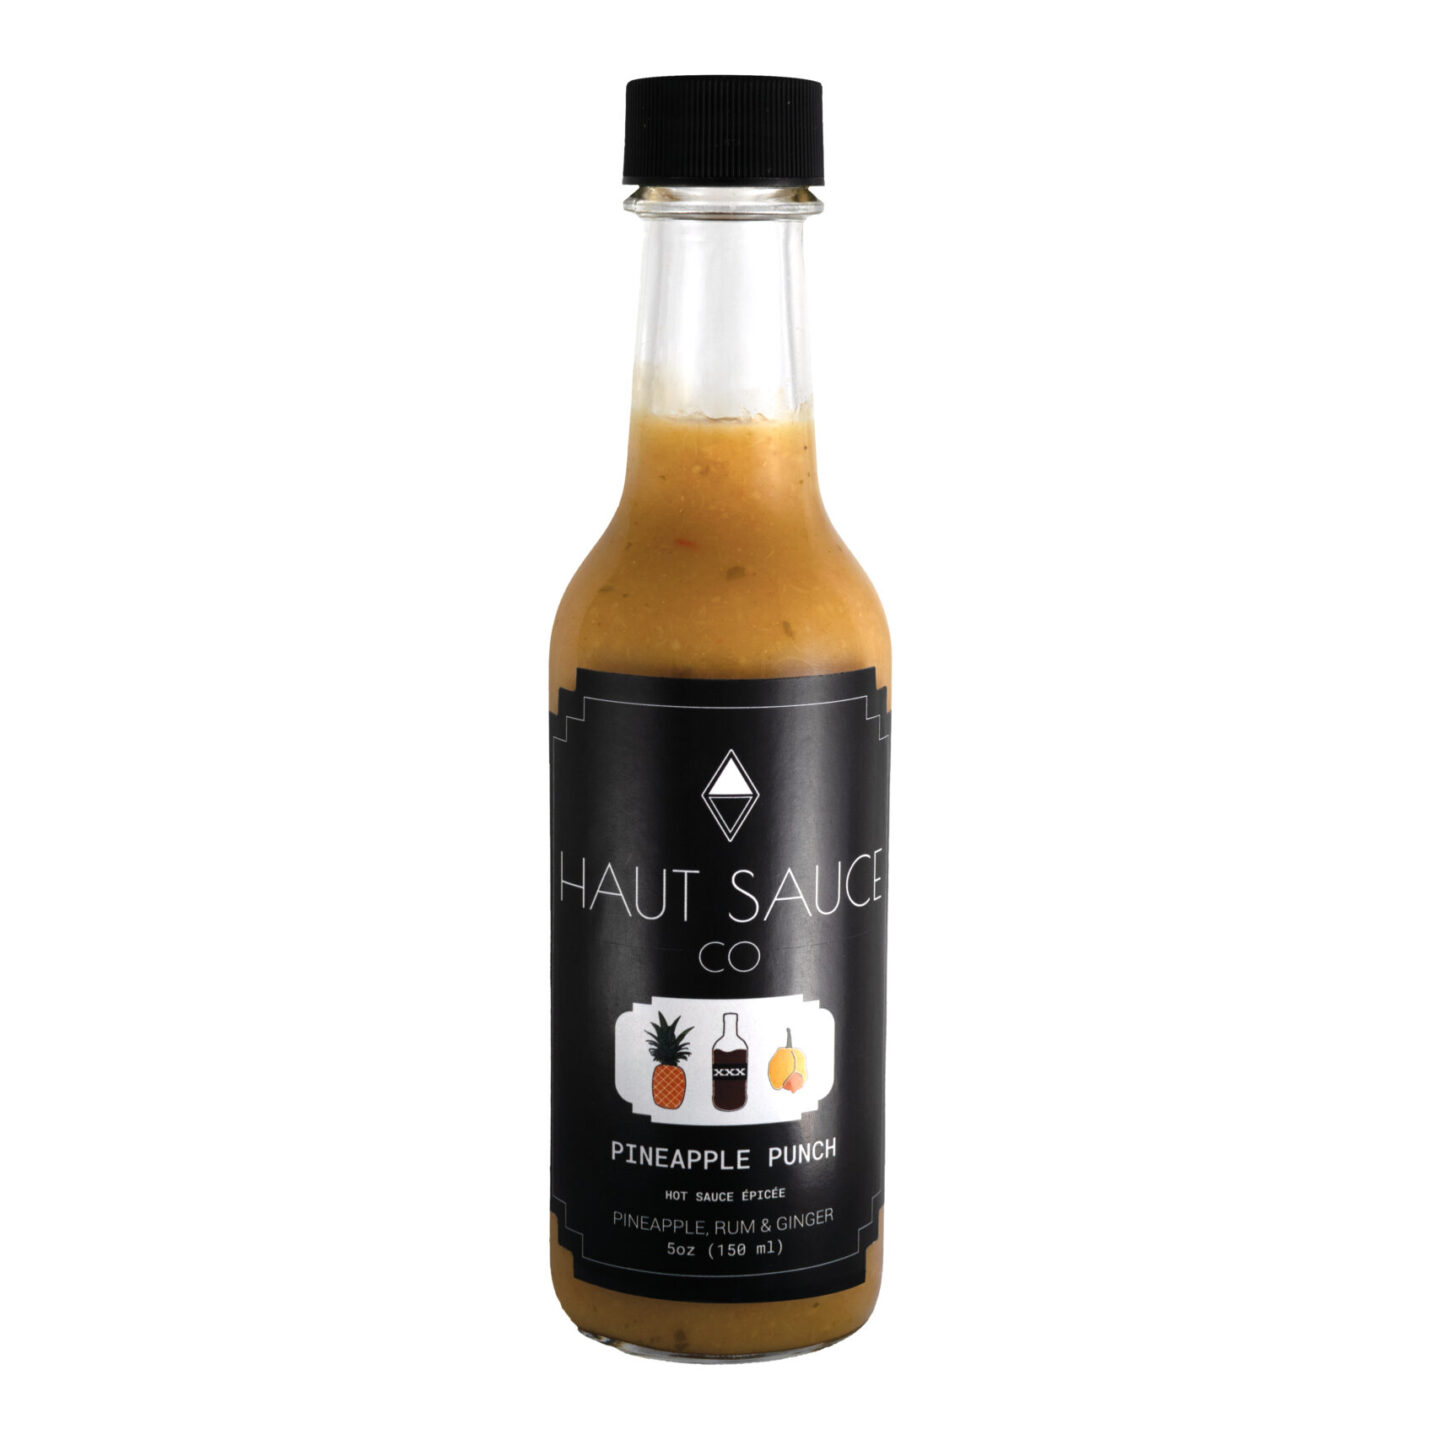 Front label view of Pineapple Punch sauce by Haut Sauce Co. Pineapple, Rum and Ginger. 5 ounces.